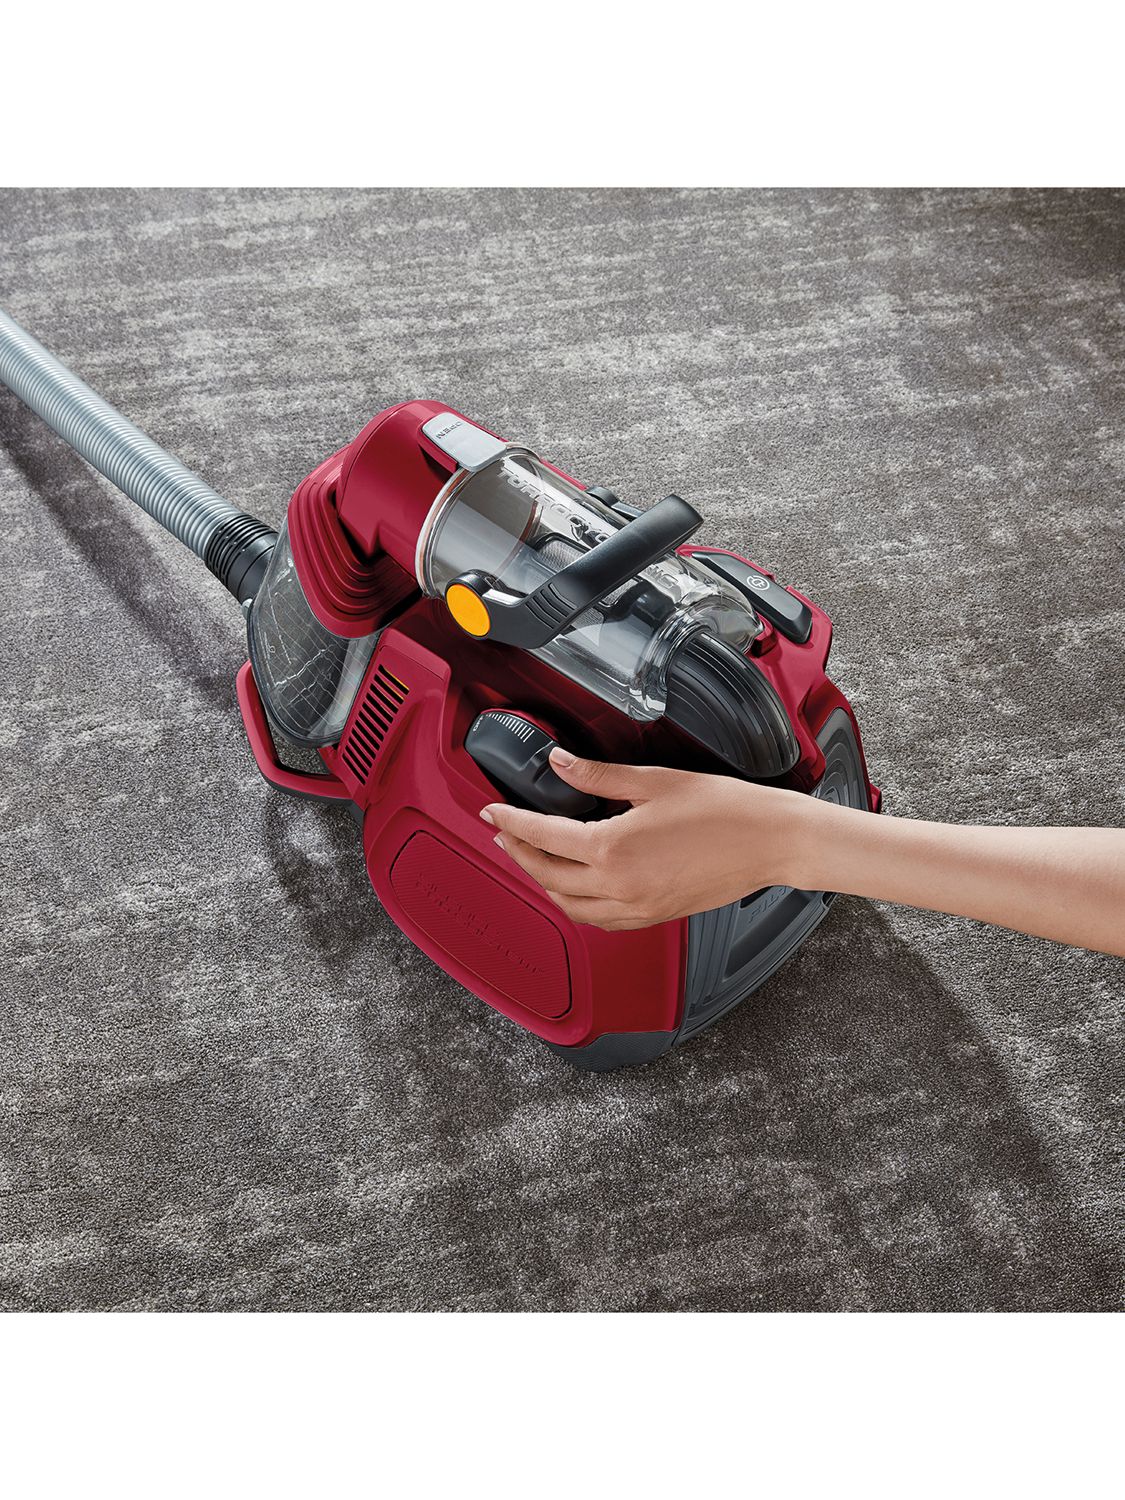 kan zijn jukbeen Glimmend AEG LX7-2-CR-A Power Animal Bagless Vacuum Cleaner, Chilli Red